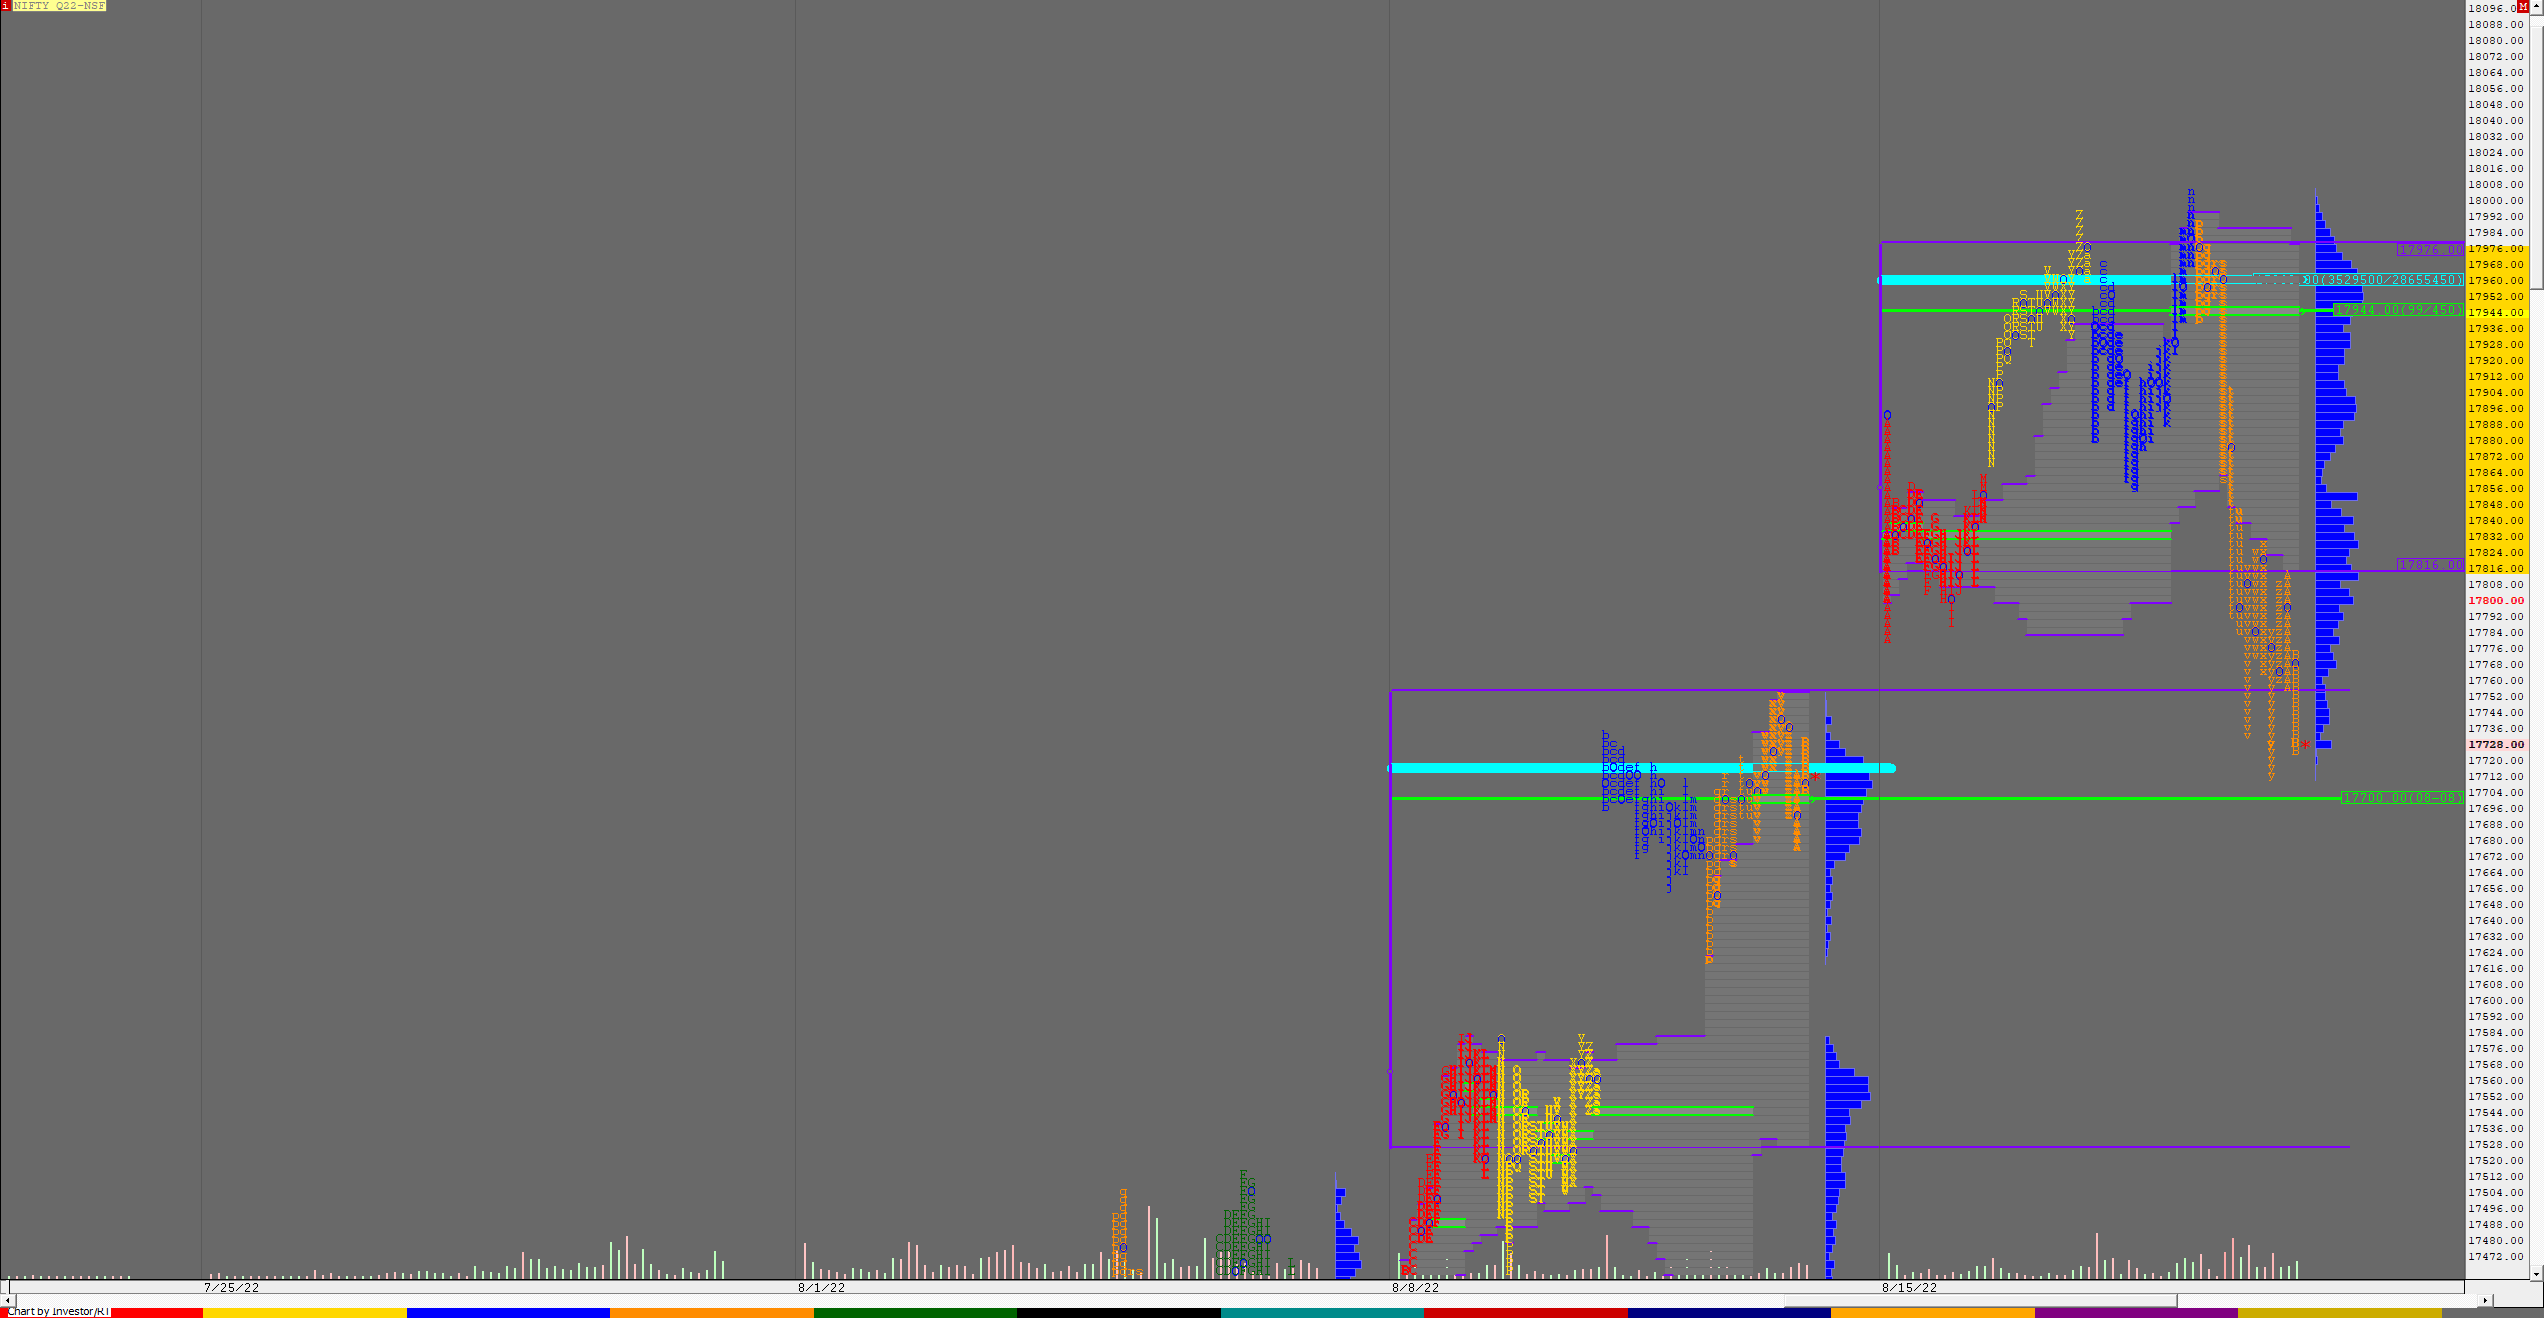 Nf F 2 Weekly Charts (15Th To 19Th Aug 2022) And Market Profile Analysis Banknifty Futures, Charts, Day Trading, Intraday Trading, Intraday Trading Strategies, Market Profile, Market Profile Trading Strategies, Nifty Futures, Order Flow Analysis, Support And Resistance, Technical Analysis, Trading Strategies, Volume Profile Trading